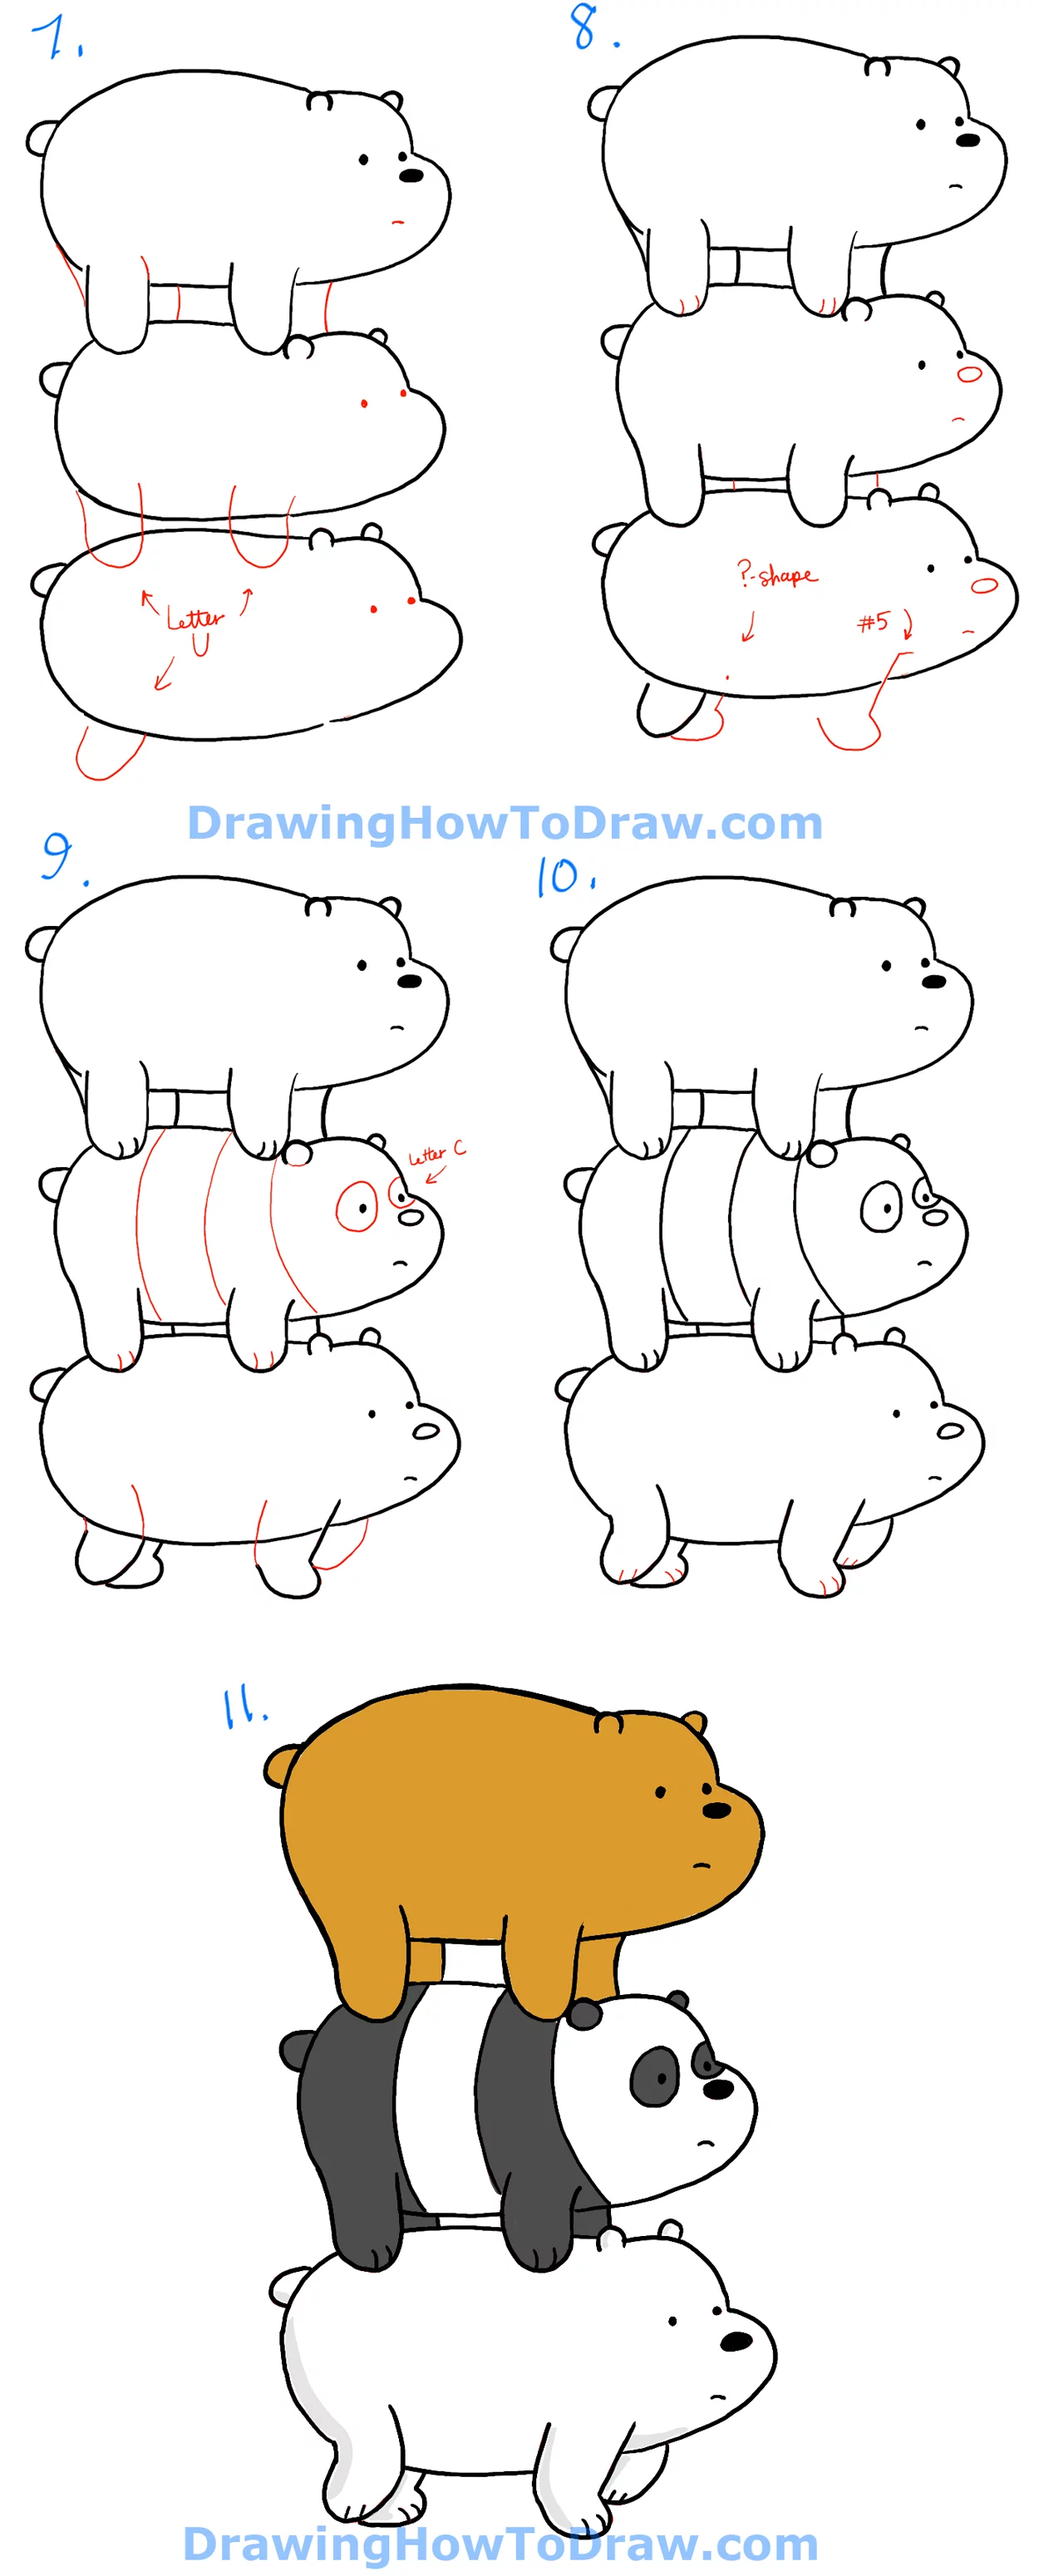 How To Draw We Bare Bears, Step by Step, Drawing Guide, by Dawn - DragoArt